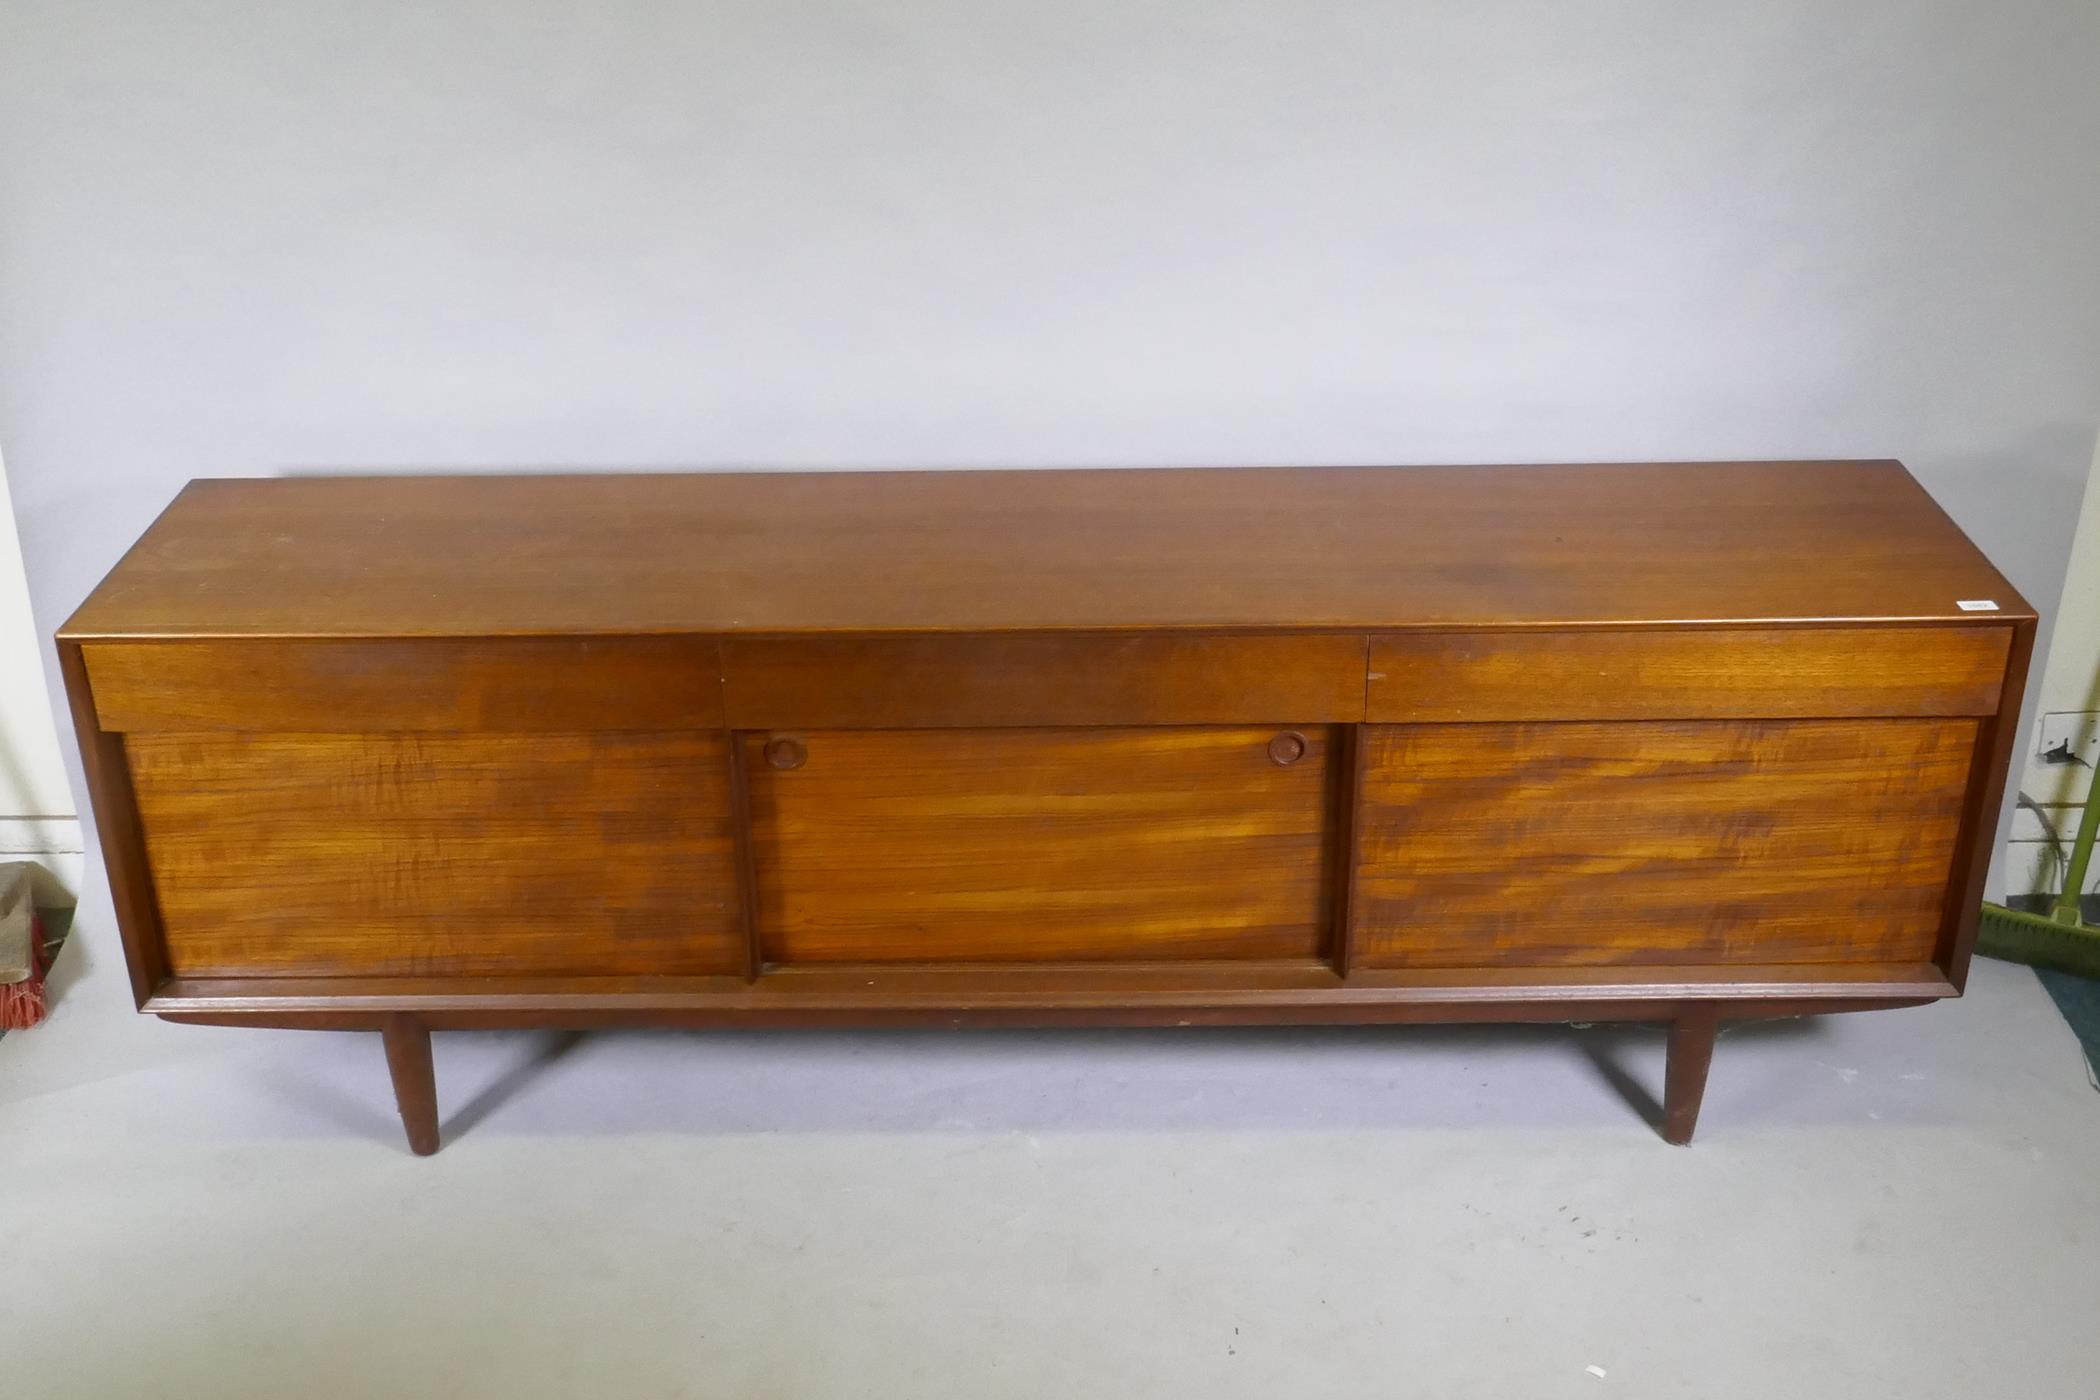 A mid century teak sideboard designed by John Herbert for A. Younger, 213 x 46cm, 72cm high - Image 2 of 5